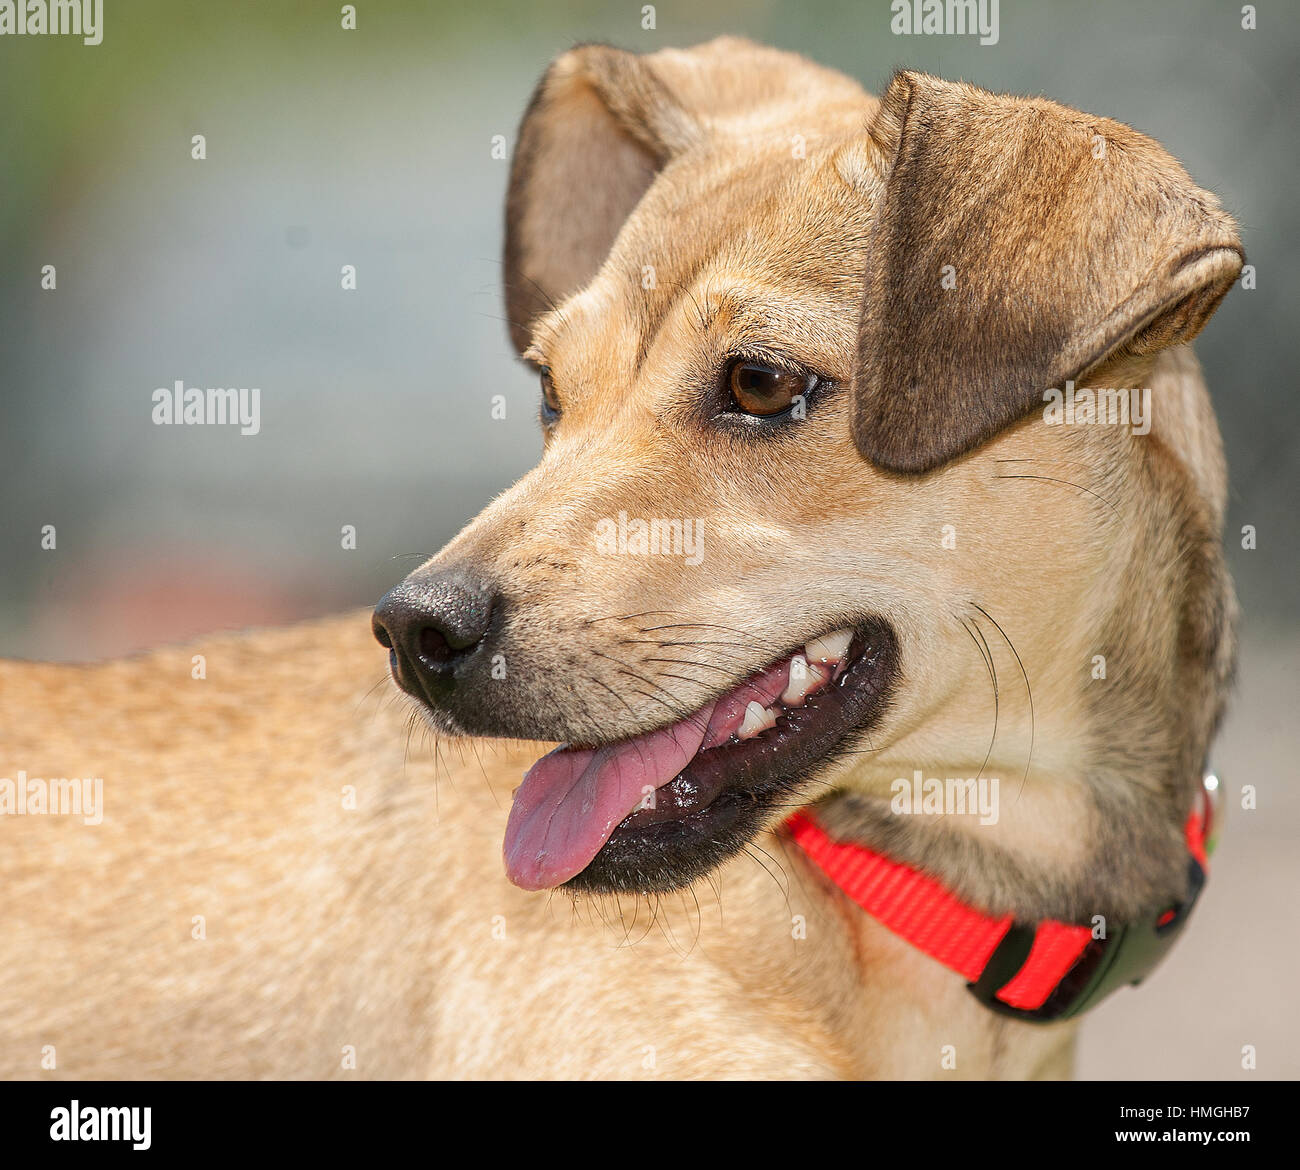 adorable brown medium dog close up headshot looking to the side with floppy ears mouth open smiling brown kind eyes with red collar and widow's peak Stock Photo